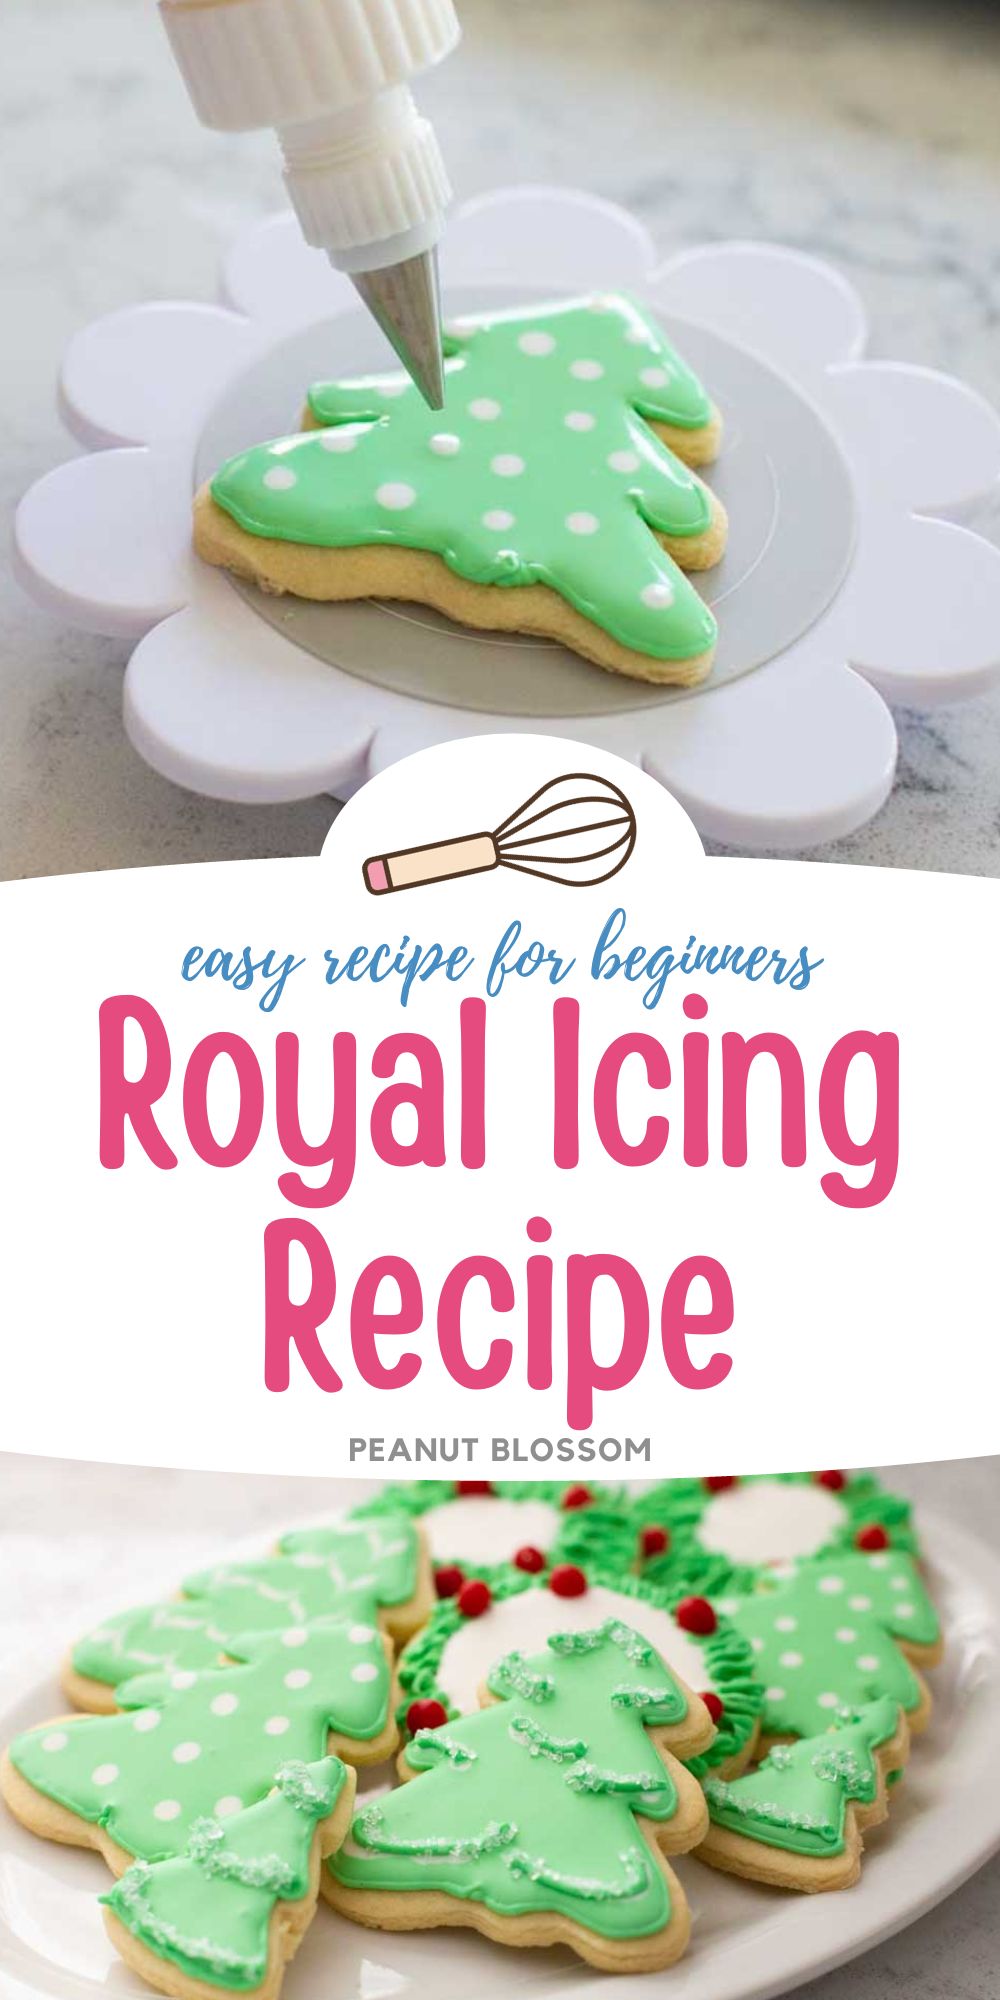 The photo collage shows some christmas cookies being decorated by royal icing.